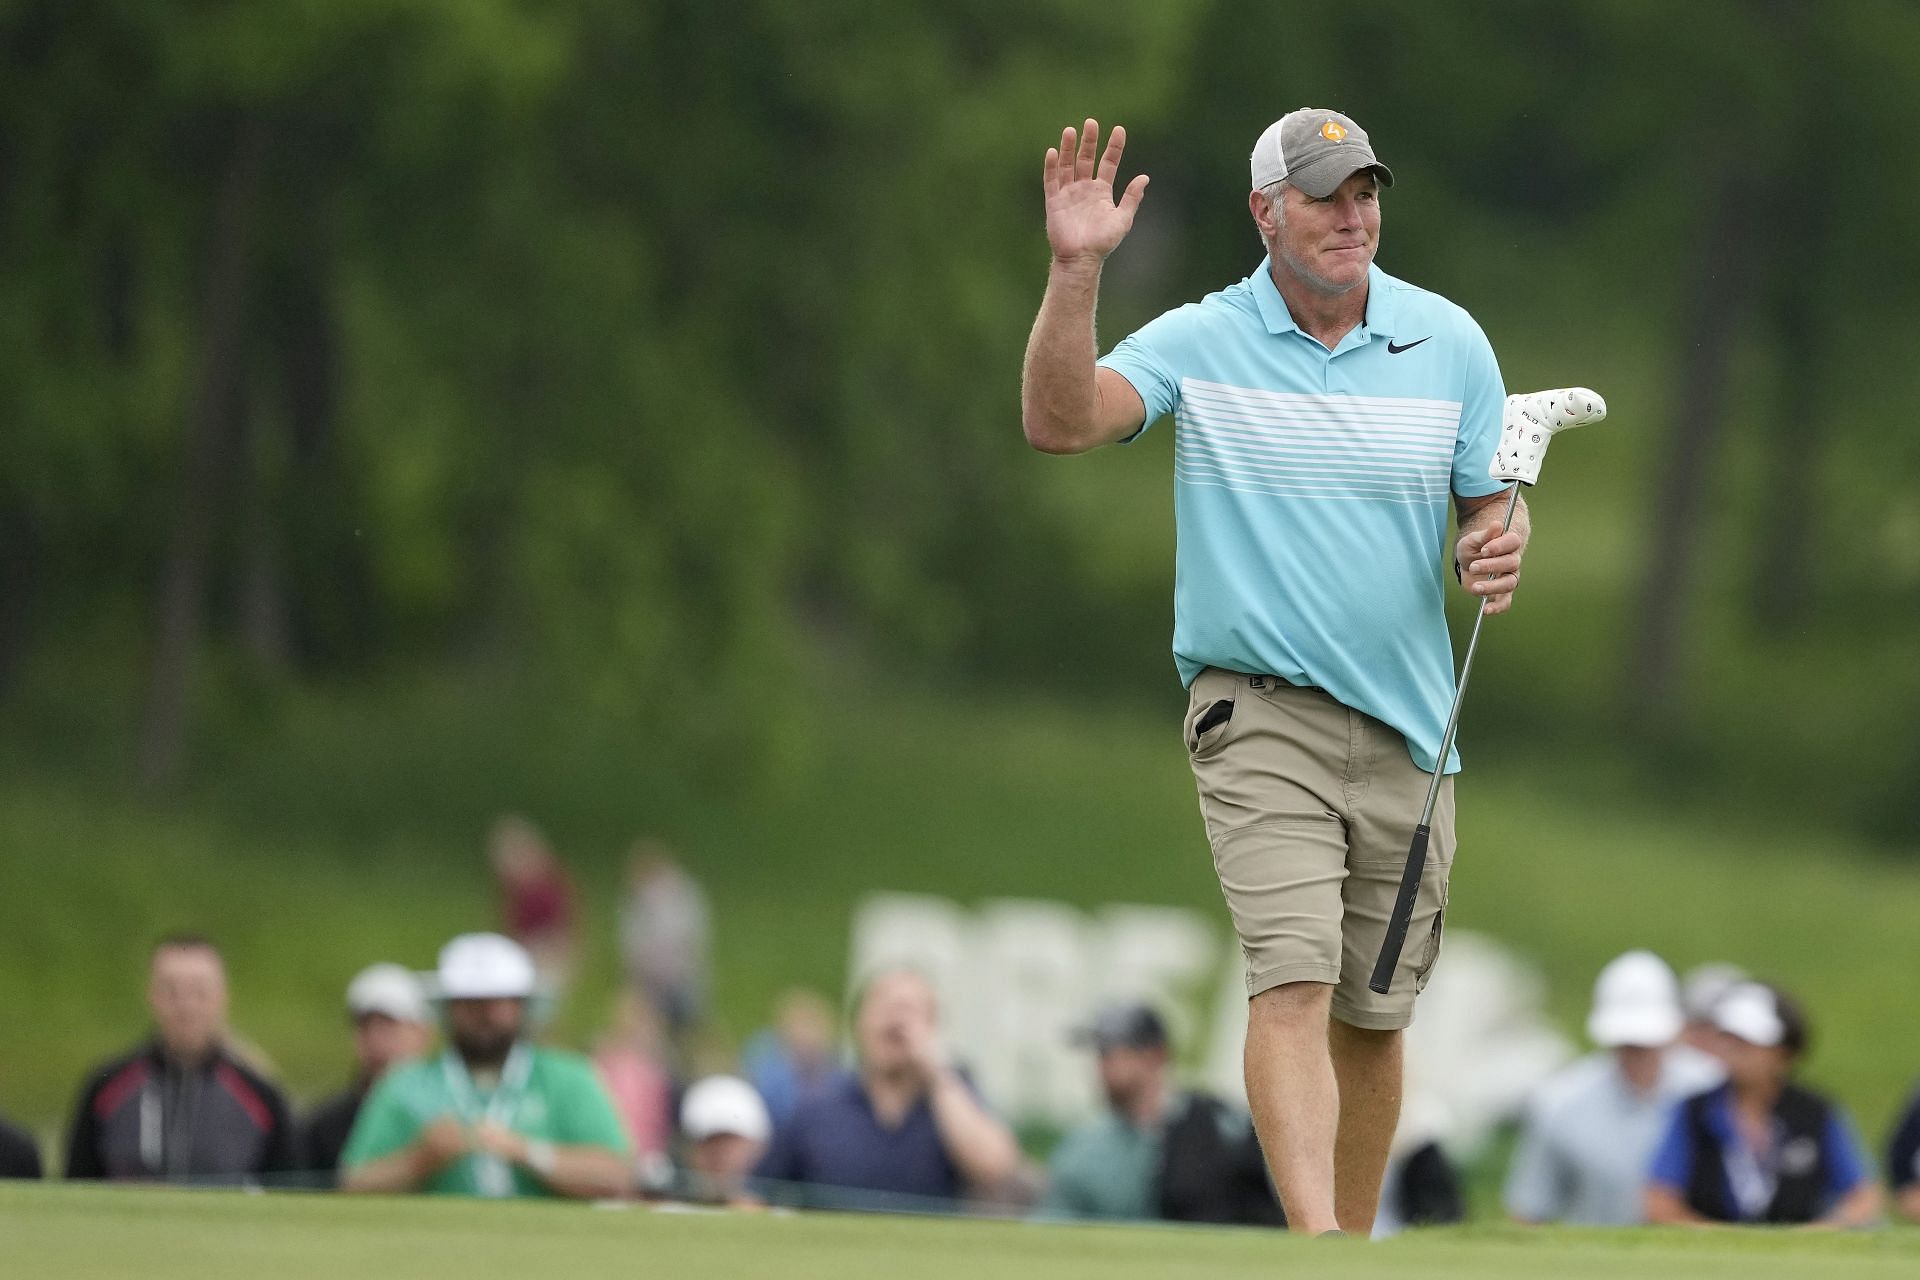 Brett Favre accused of asking for money to build a volleyball stadium